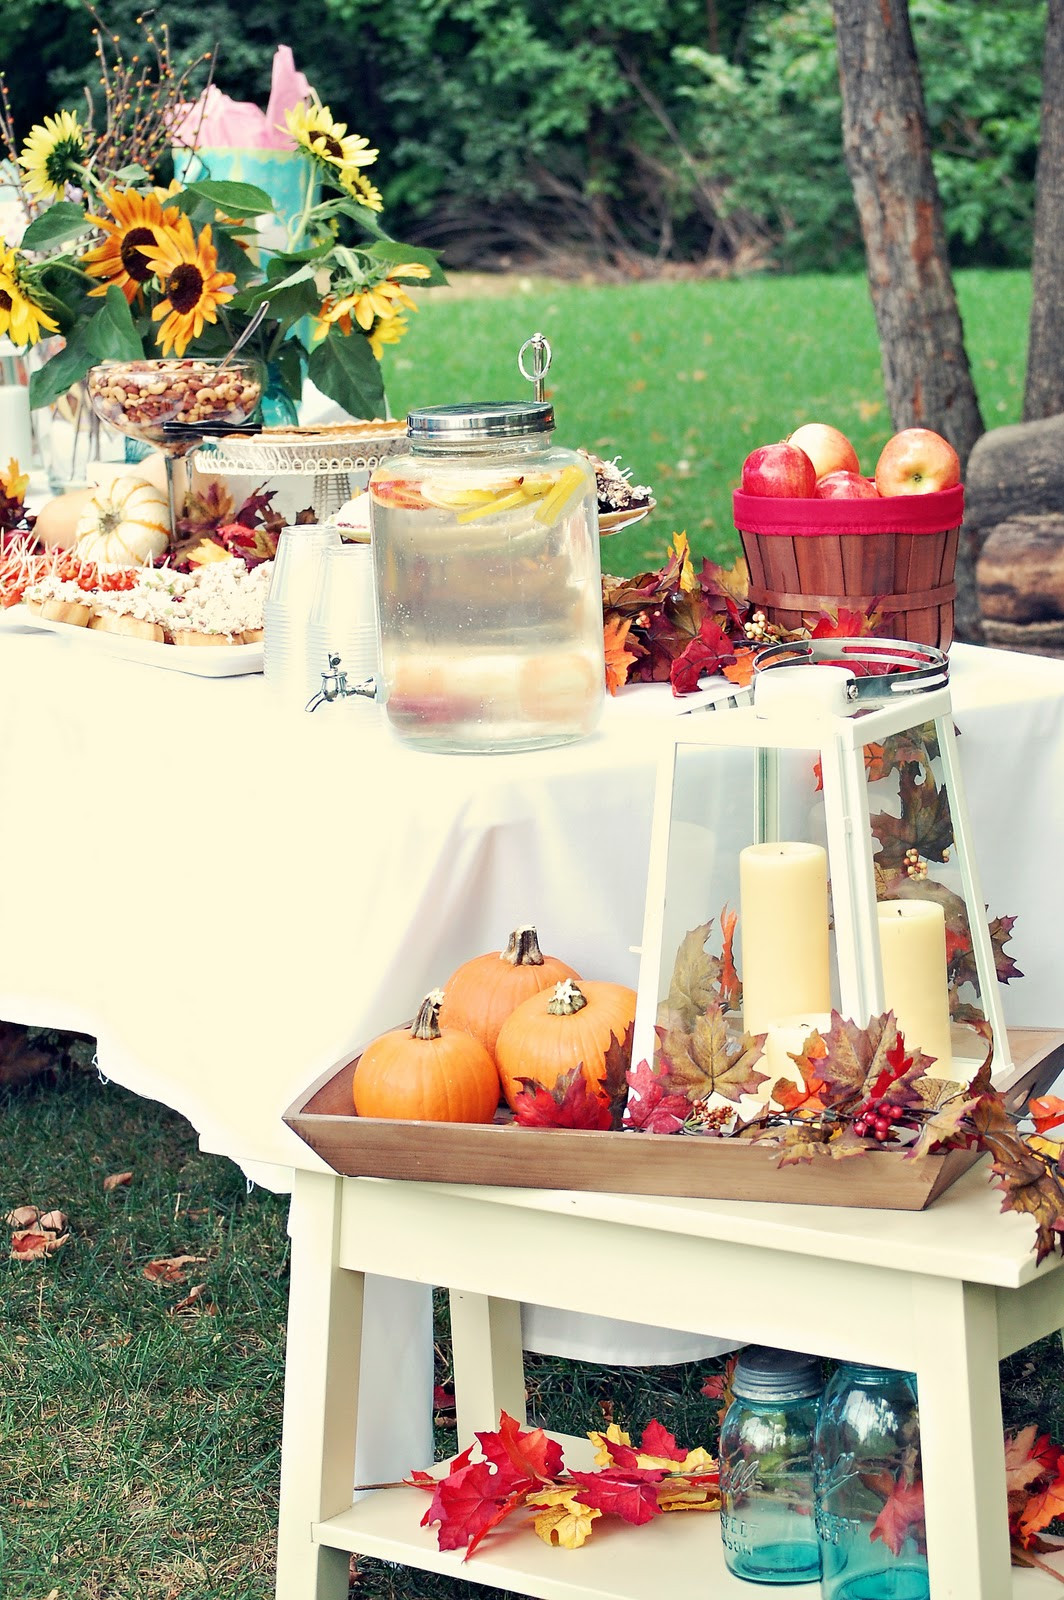 Fall Baby Shower Decorating Ideas
 A Feathered Nest Fall Baby Shower